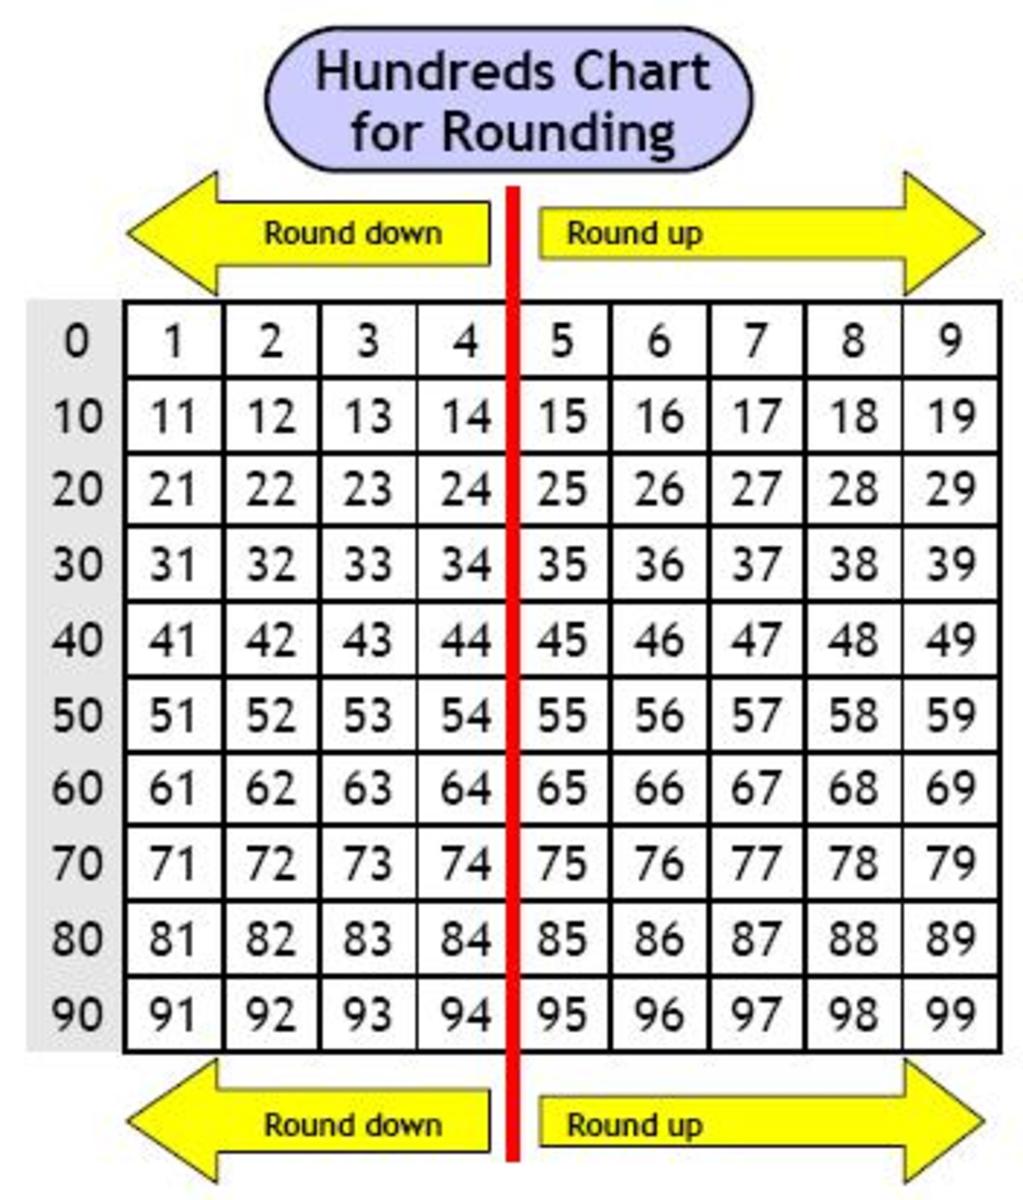 maths-help-how-to-round-a-number-to-the-nearest-10-100-or-1000-simple